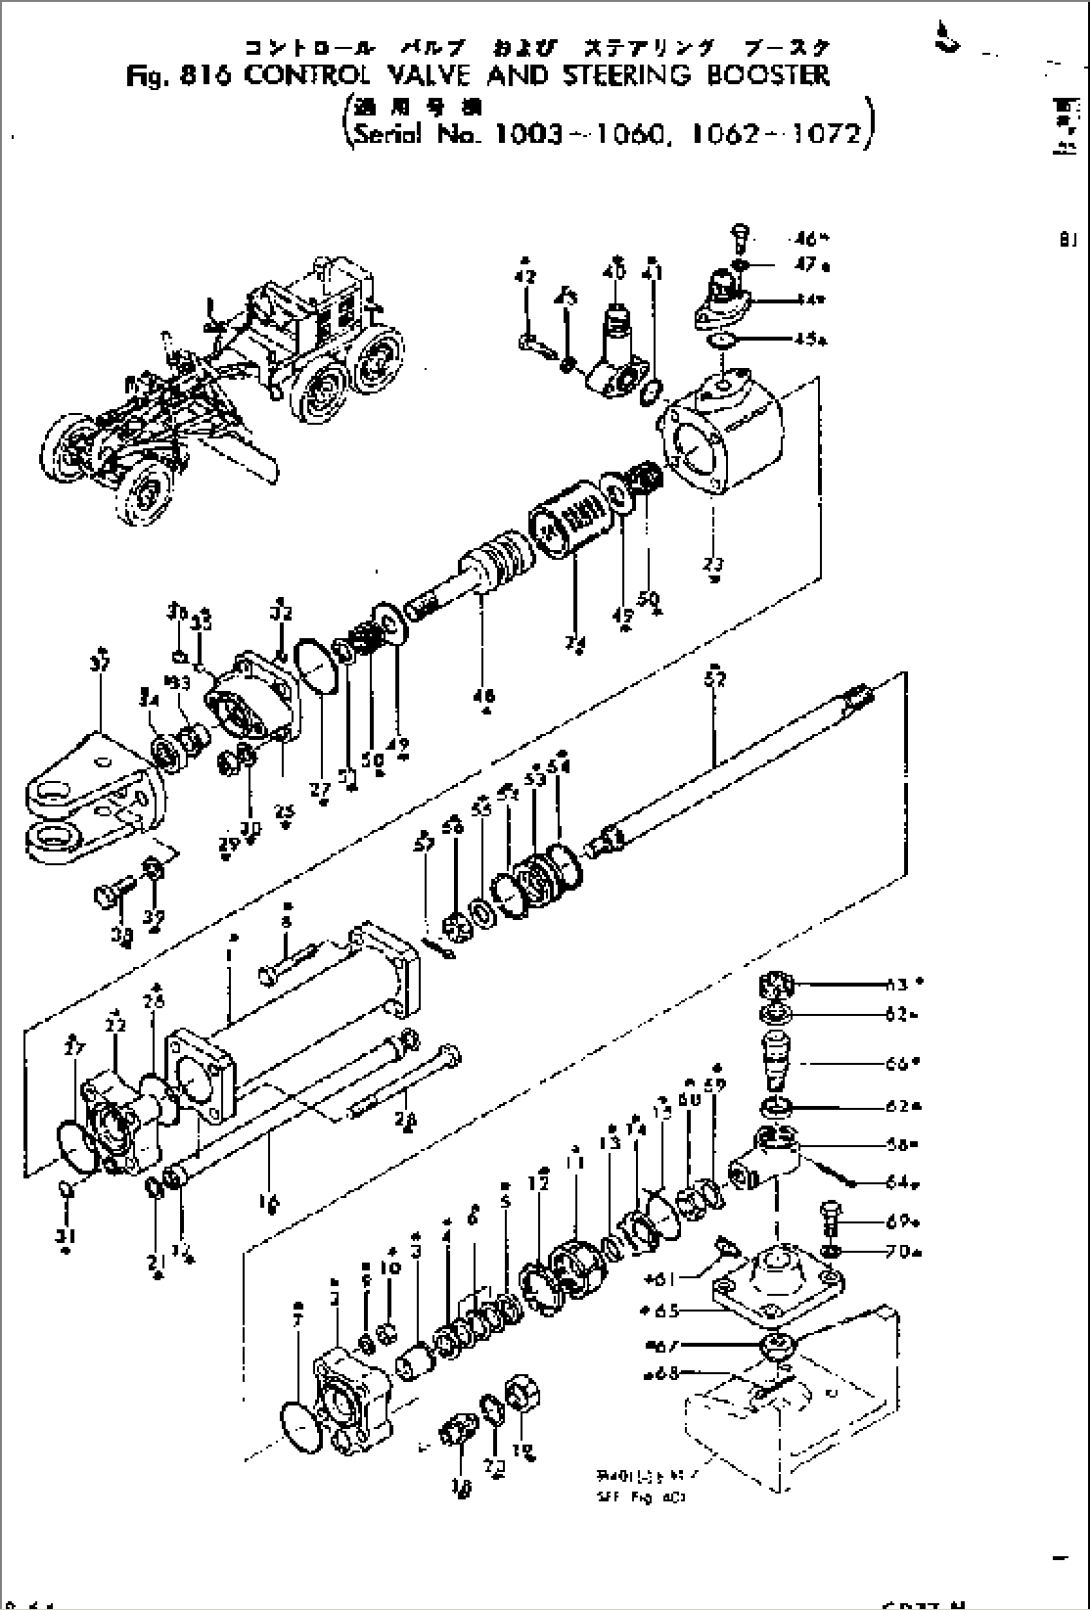 CONTROL VALVE AND STEERING BOOSTER(#1003-1072)